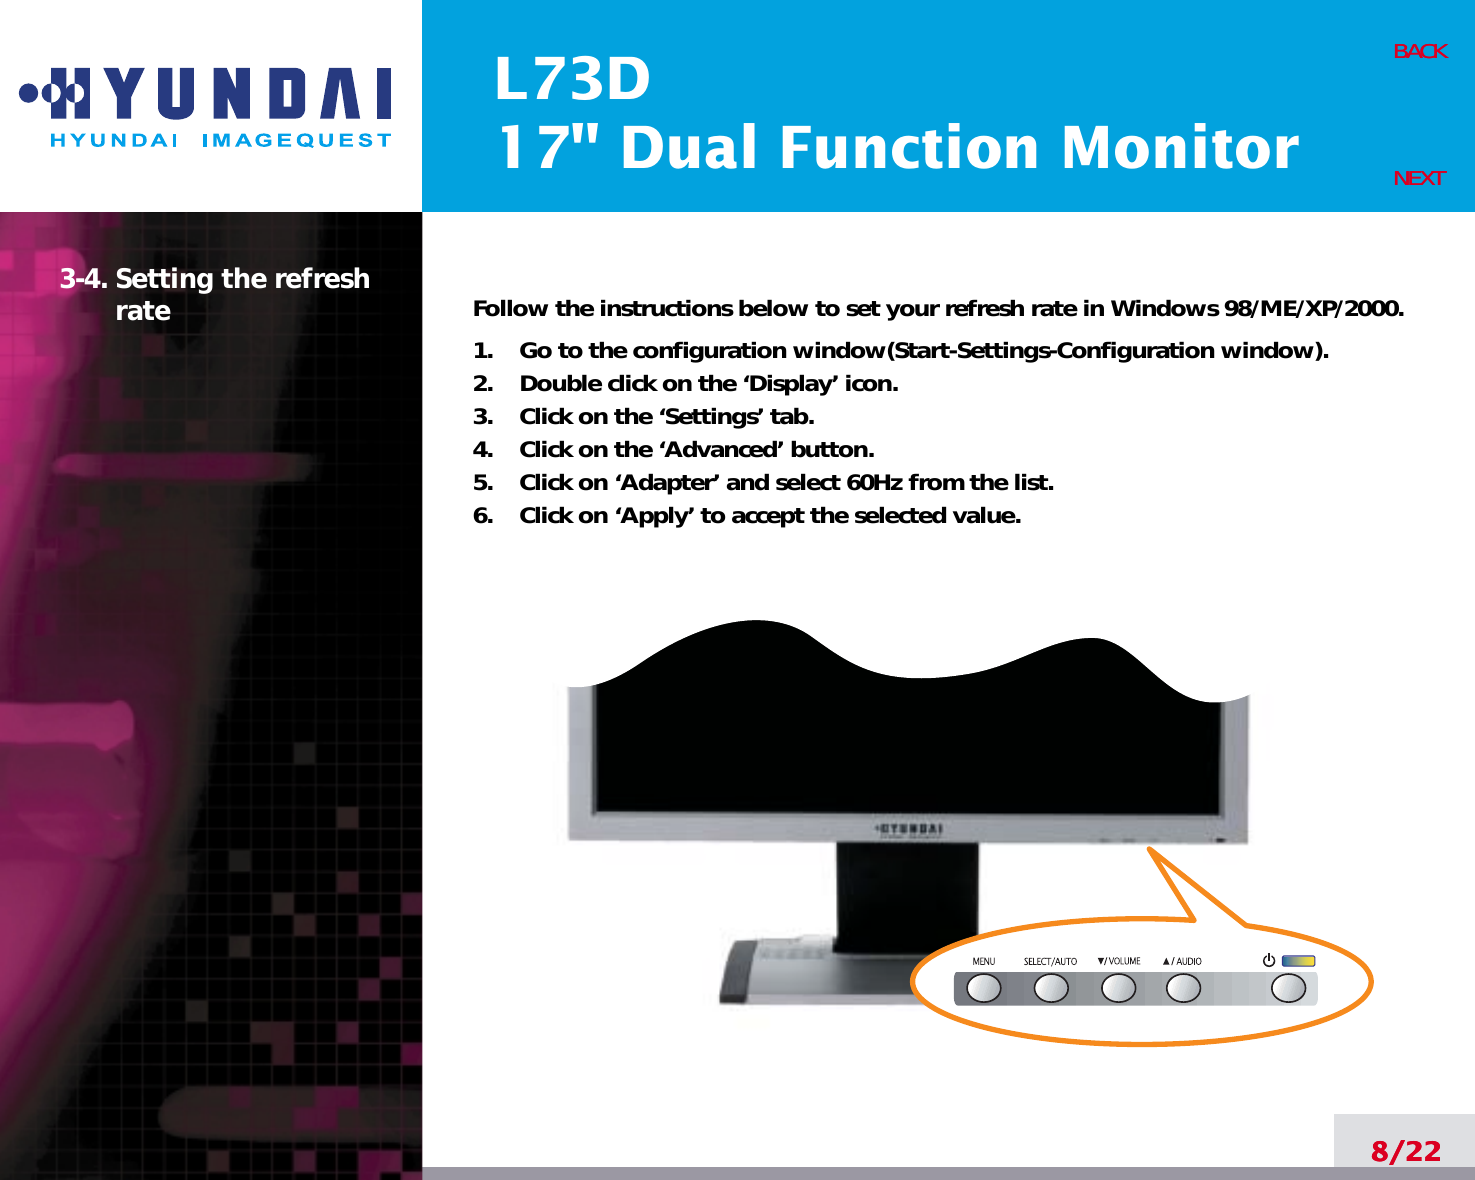 L73D17&quot; Dual Function Monitor8/22BACKNEXT3-4. Setting the refreshrate Follow the instructions below to set your refresh rate in Windows 98/ME/XP/2000.1.    Go to the configuration window(Start-Settings-Configuration window).2.    Double click on the ‘Display’ icon.3.    Click on the ‘Settings’ tab.4.    Click on the ‘Advanced’ button.5.    Click on ‘Adapter’ and select 60Hz from the list.6.    Click on ‘Apply’ to accept the selected value.8/22BACKNEXT